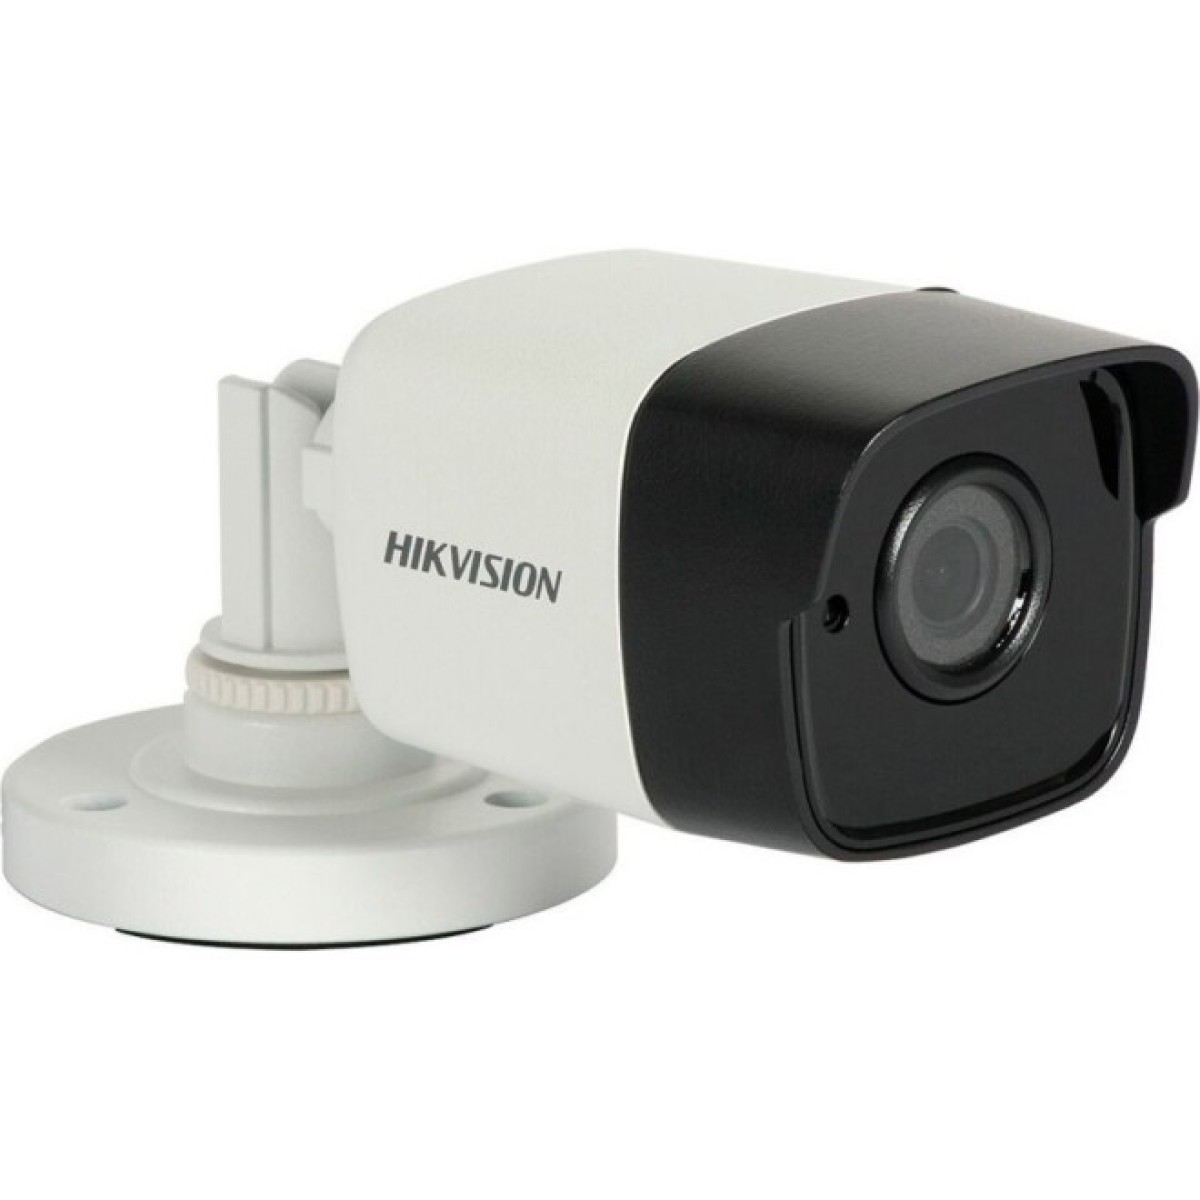 Камера Hikvision DS-2CE16D8T-ITF (2.8) 256_256.jpg